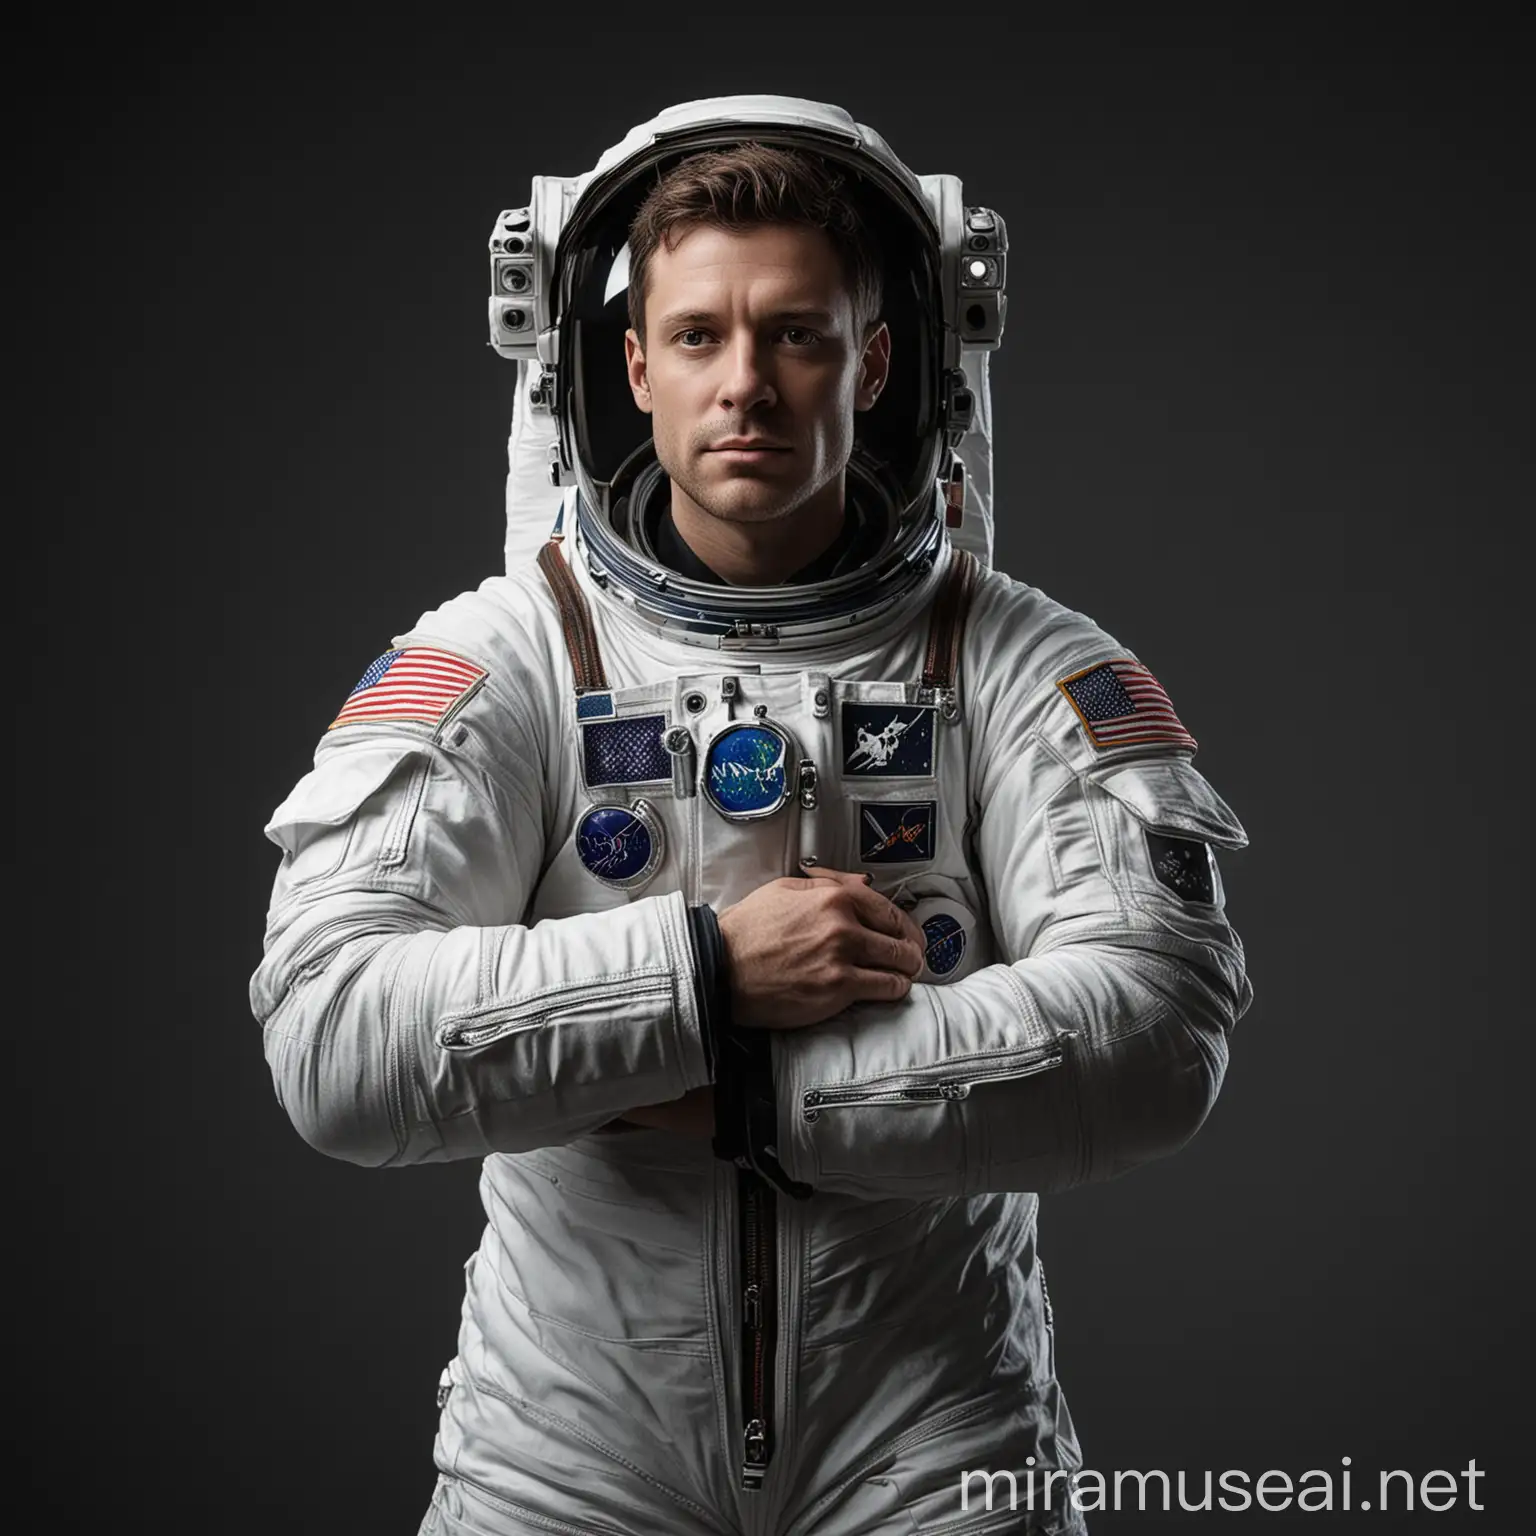 A hyper realistic photo of an astronaut on a white uniform standing majestically, folding his arms, on a black studio background 